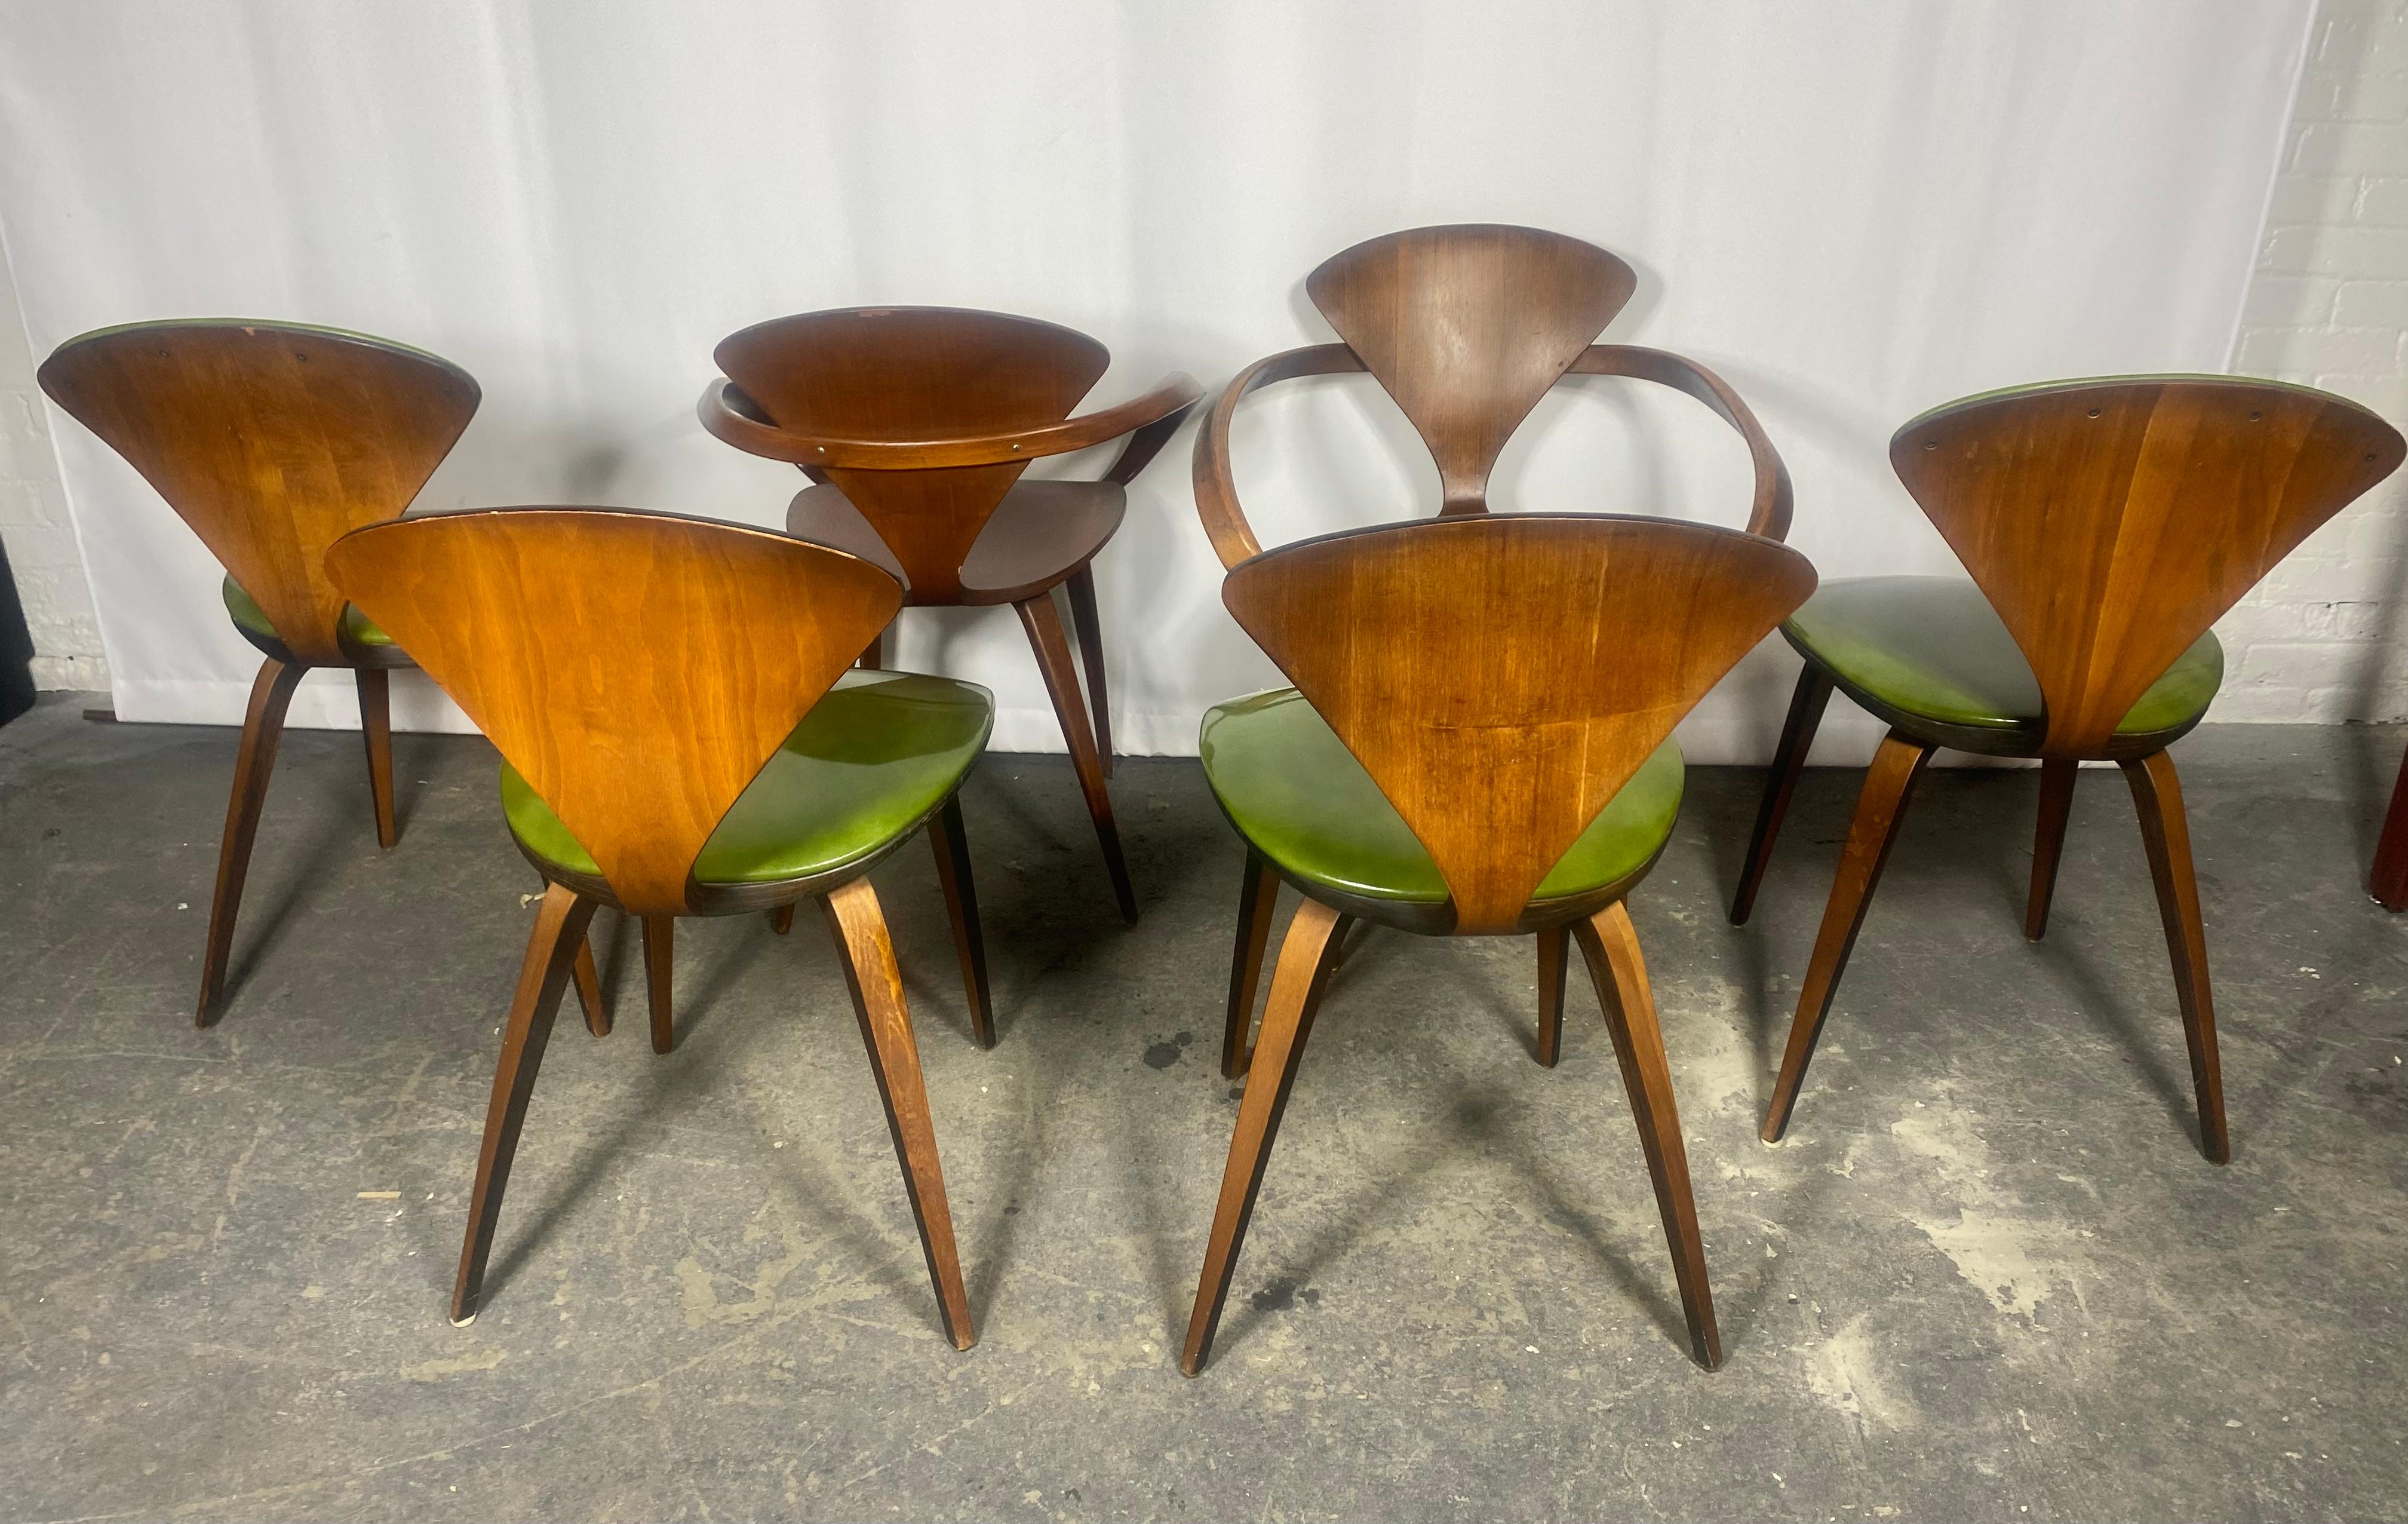 Mid-Century Modern Set of 6 Norman Cherner Dining Chairs, Made by Plycraft, USA, 1963. 2 Arm Chairs For Sale